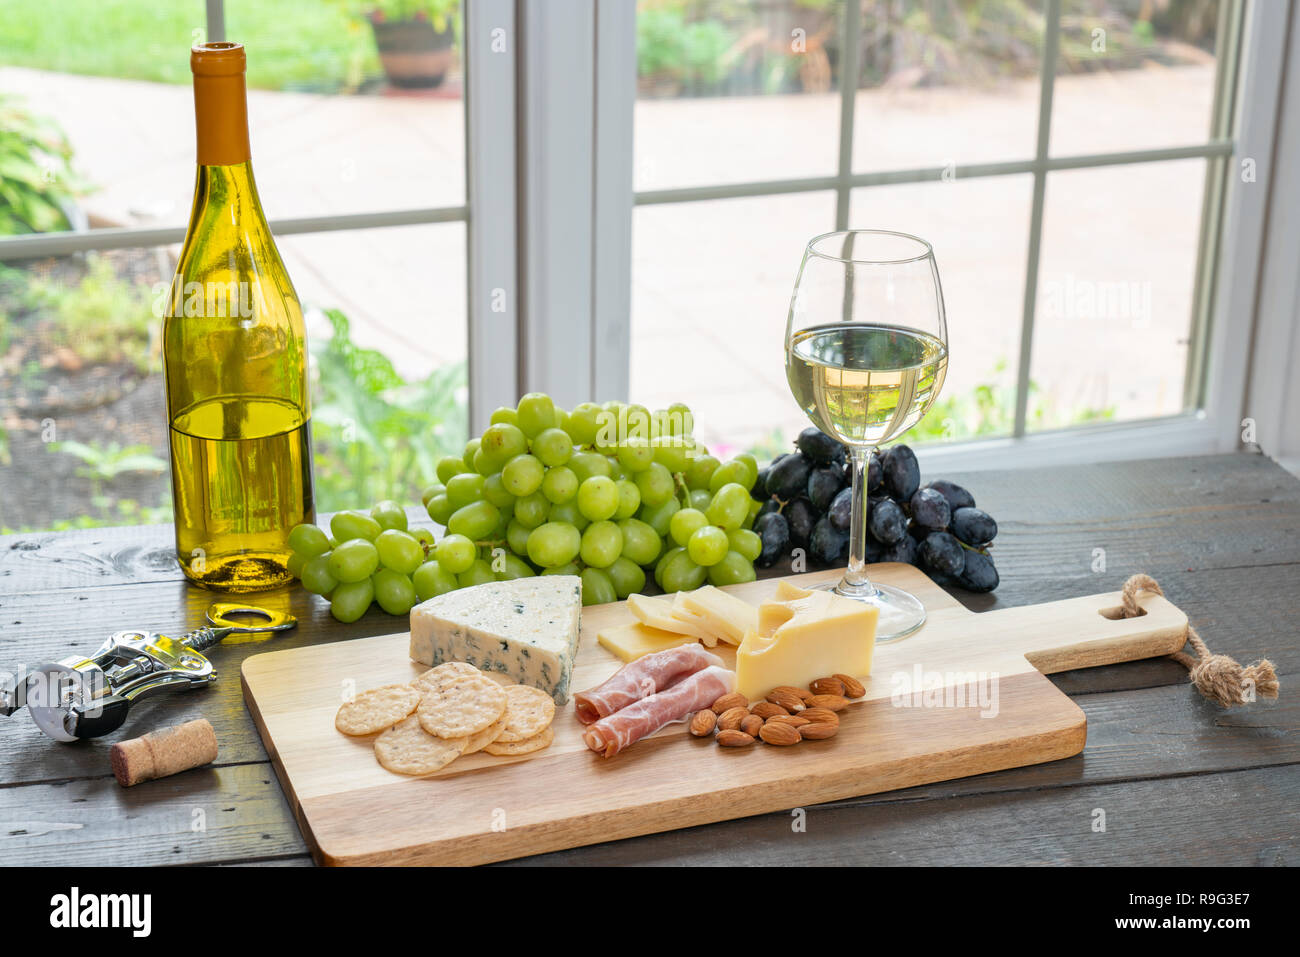 Glass of white wine with wine bottle, cheese, crackers, almonds and grapes Stock Photo